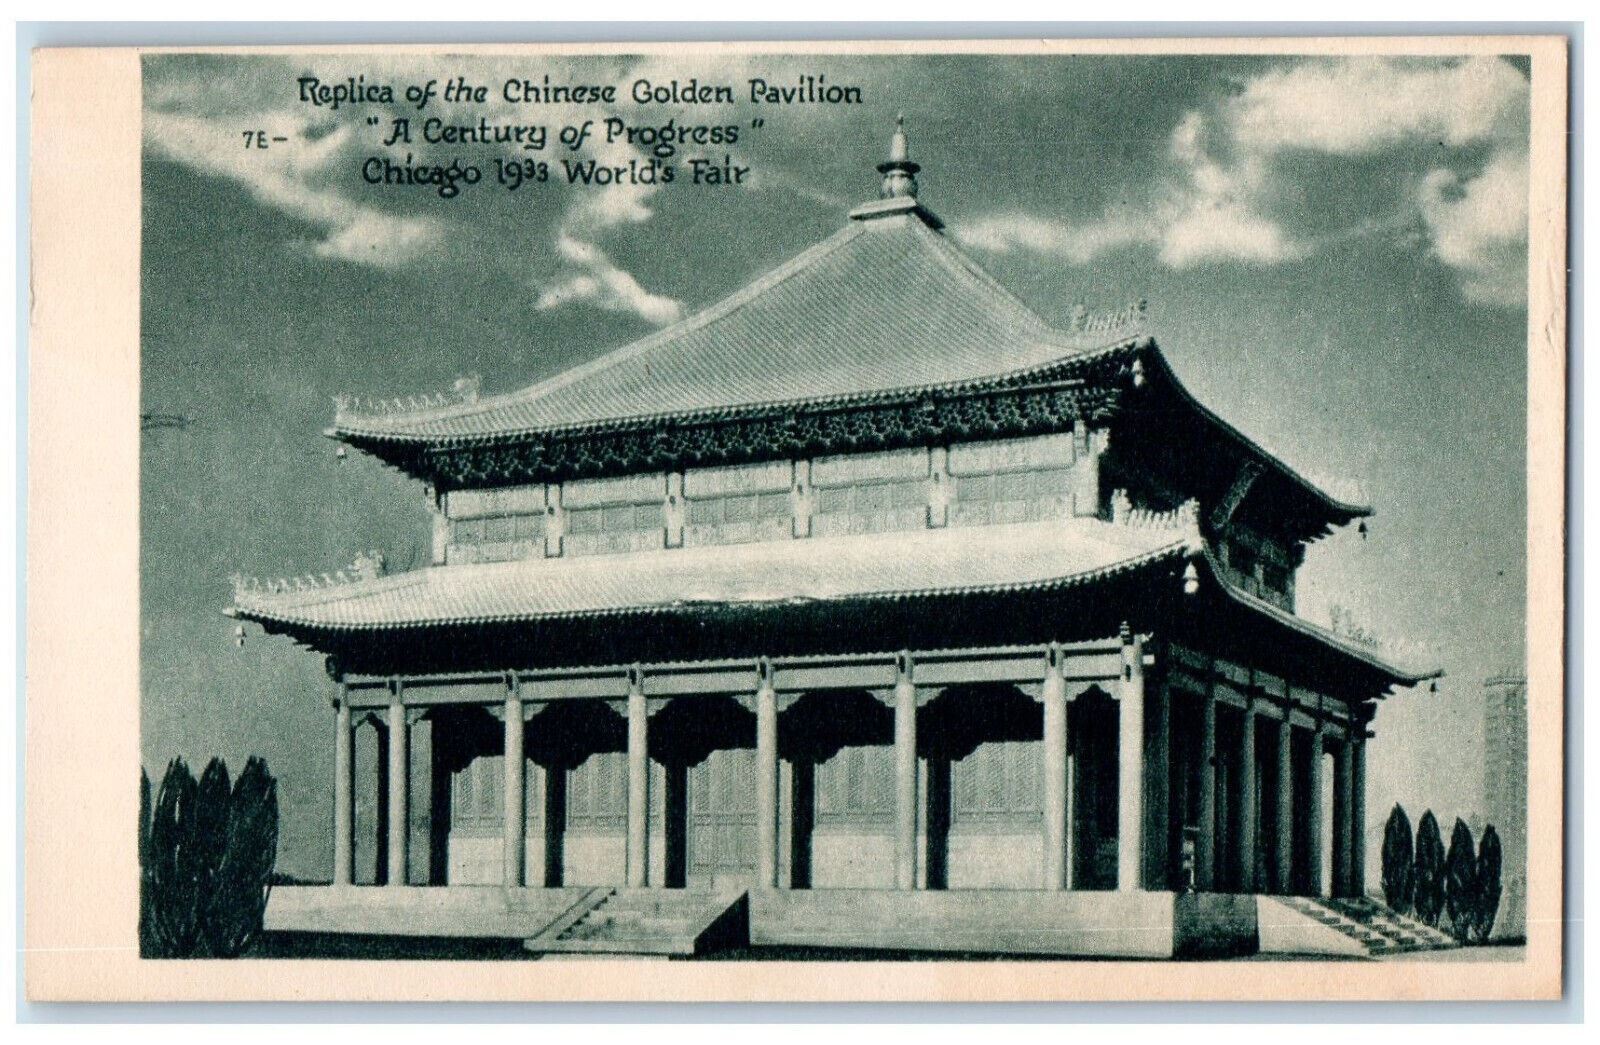 1933 Replica of the Chinese Golden Pavilion, World's Fair Chicago IL Postcard